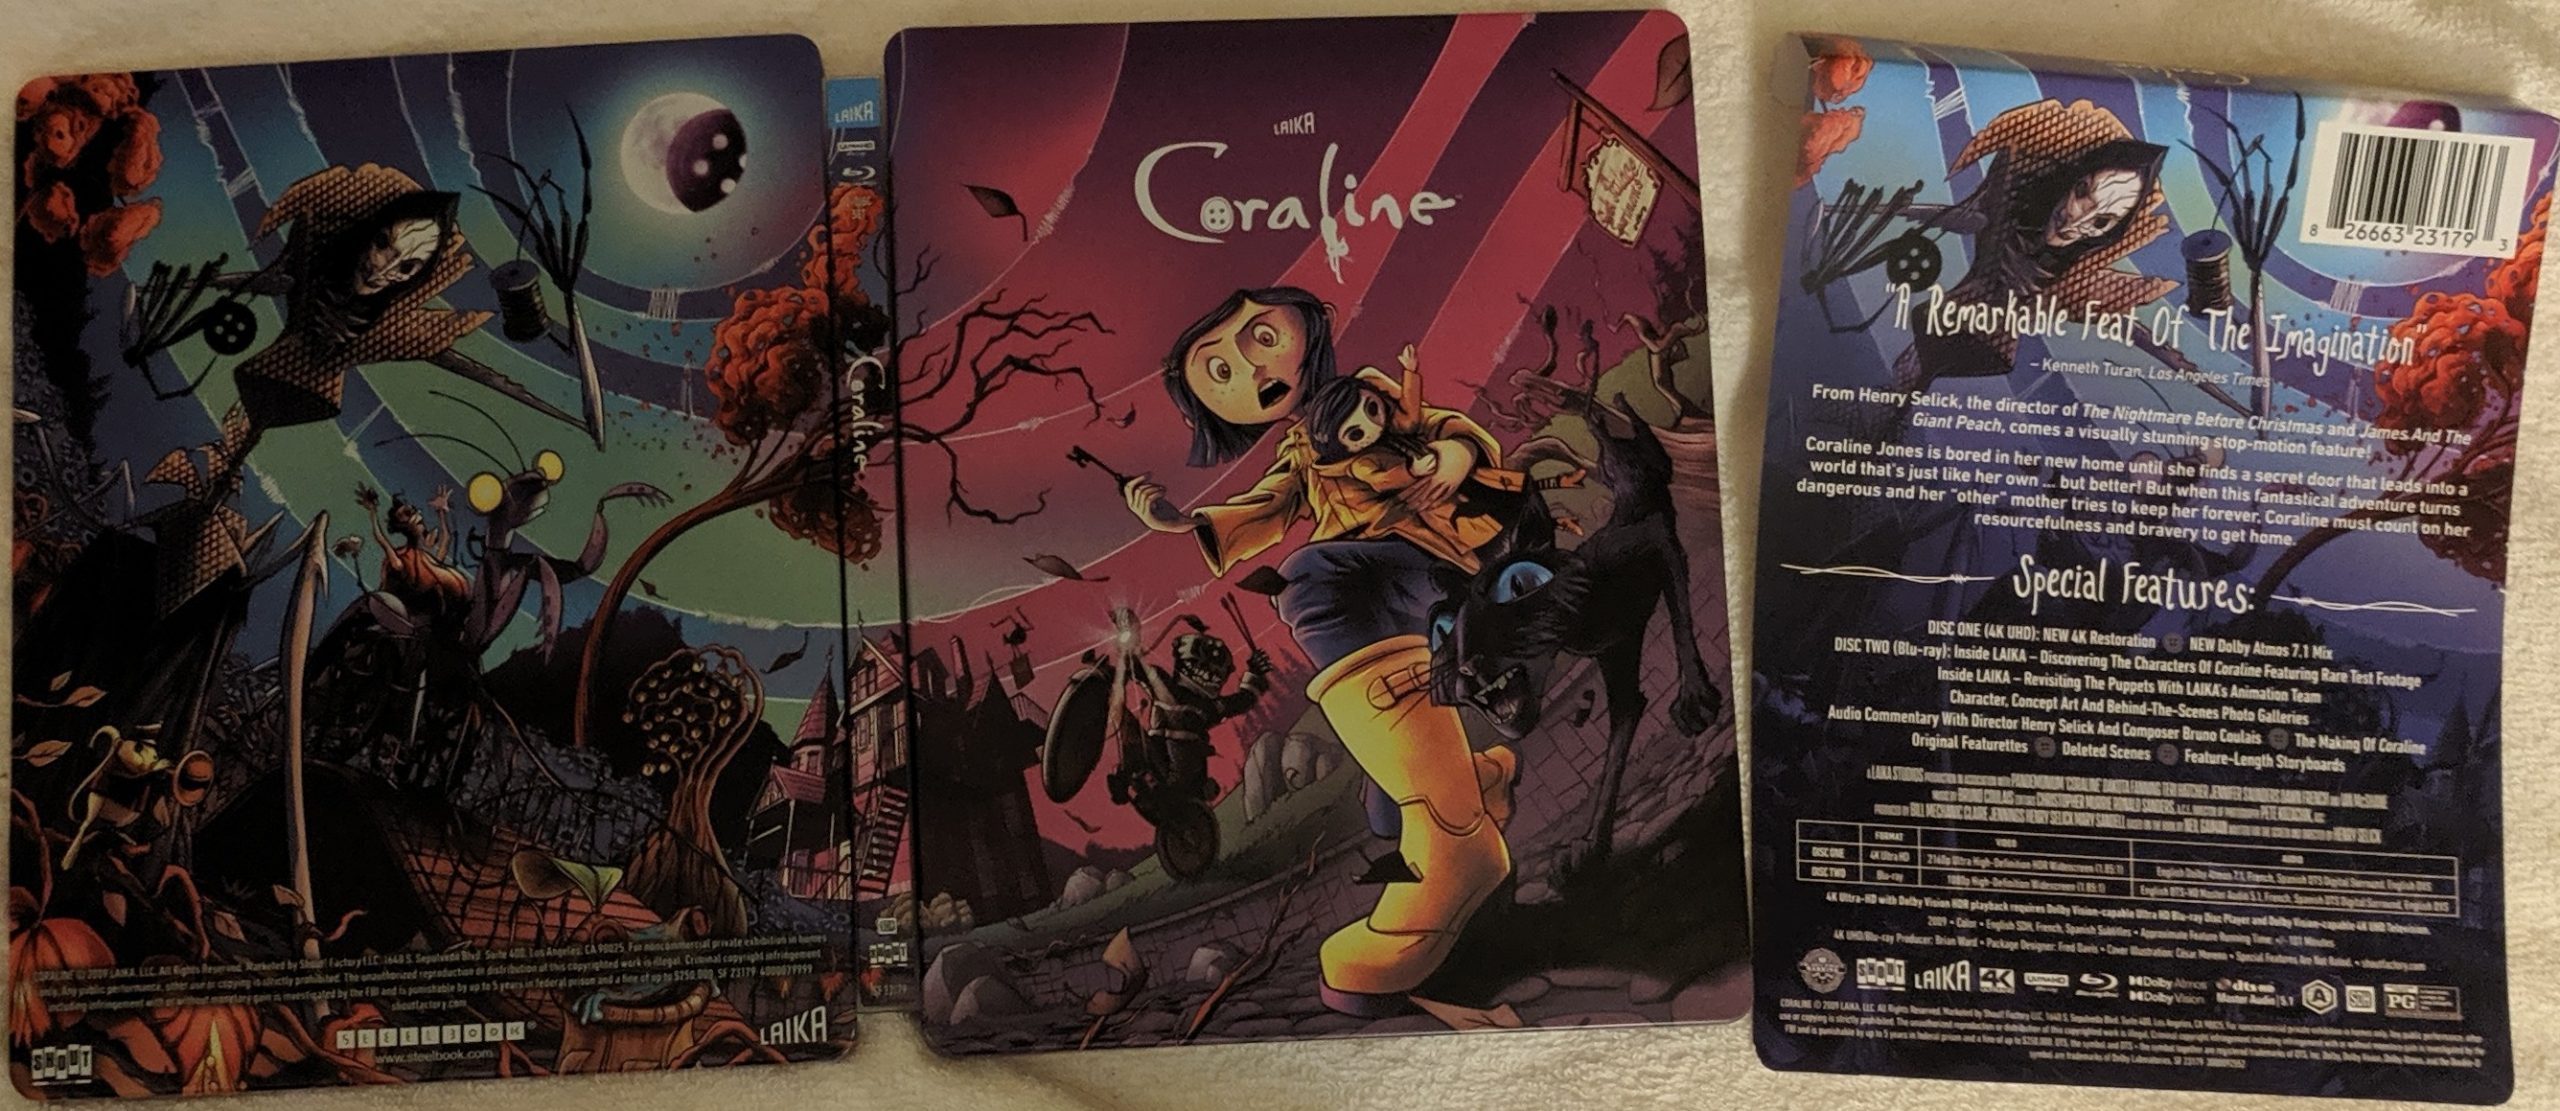 Coraline Book Review - Tales of Belle